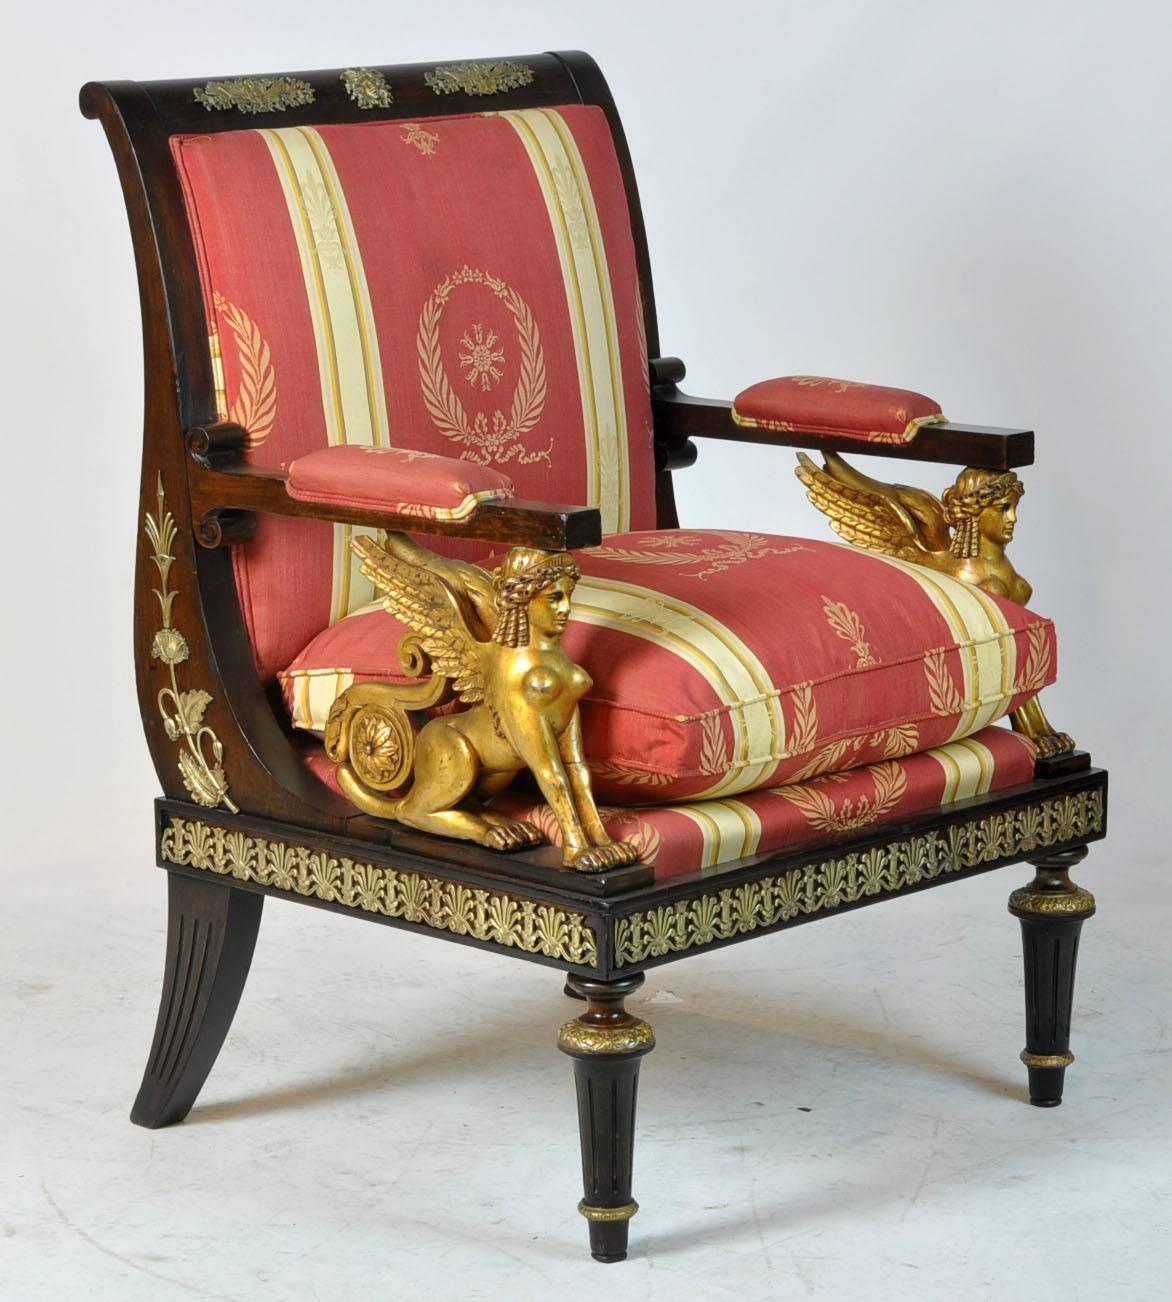 Pair of large French armchairs with gilt sphinx's on each arm. Empire revival period with bronze mounts around the chairs. Unusual form and sturdy.